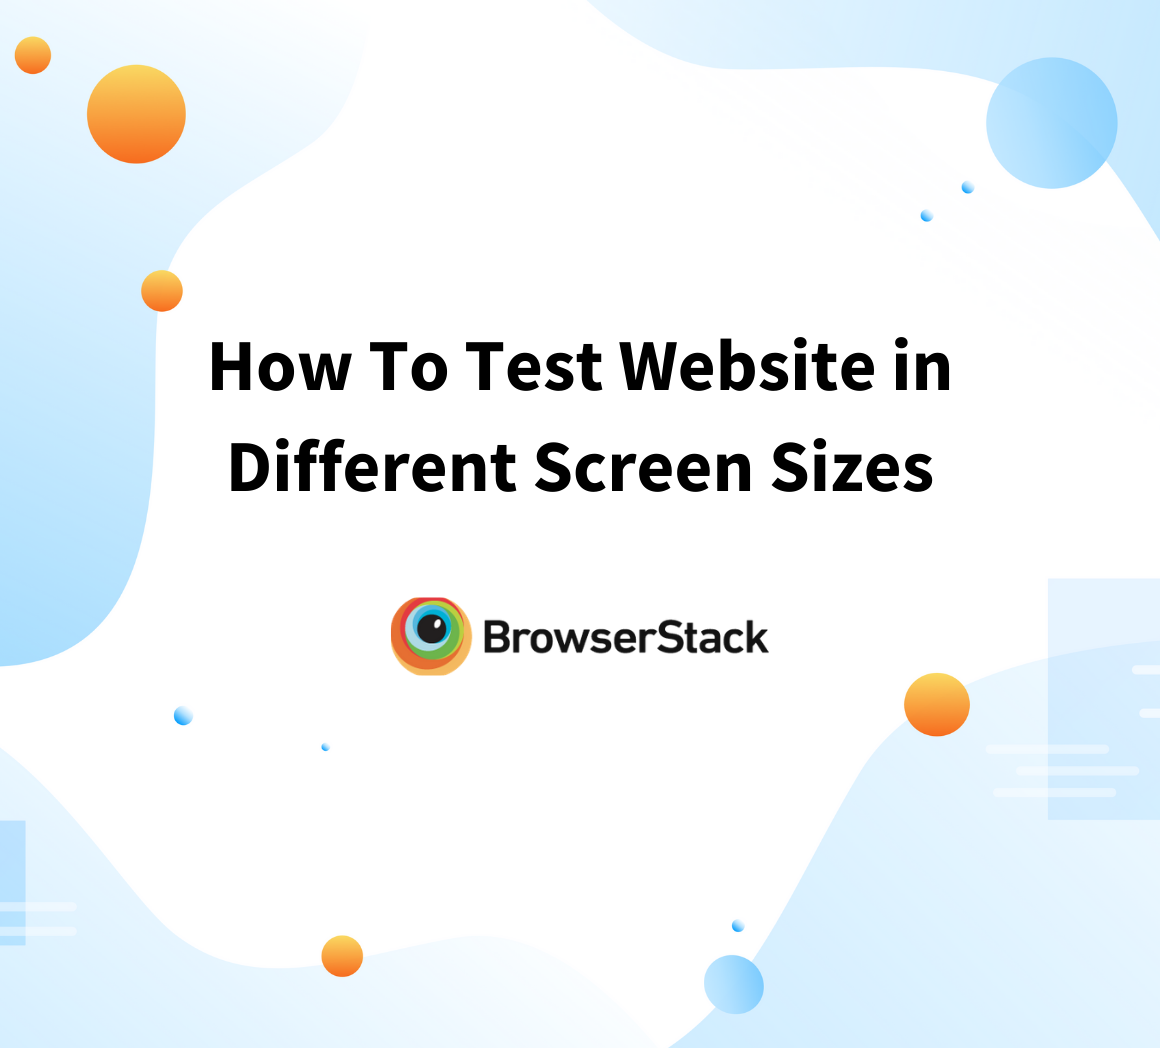 How To Test Website in Different Screen Sizes